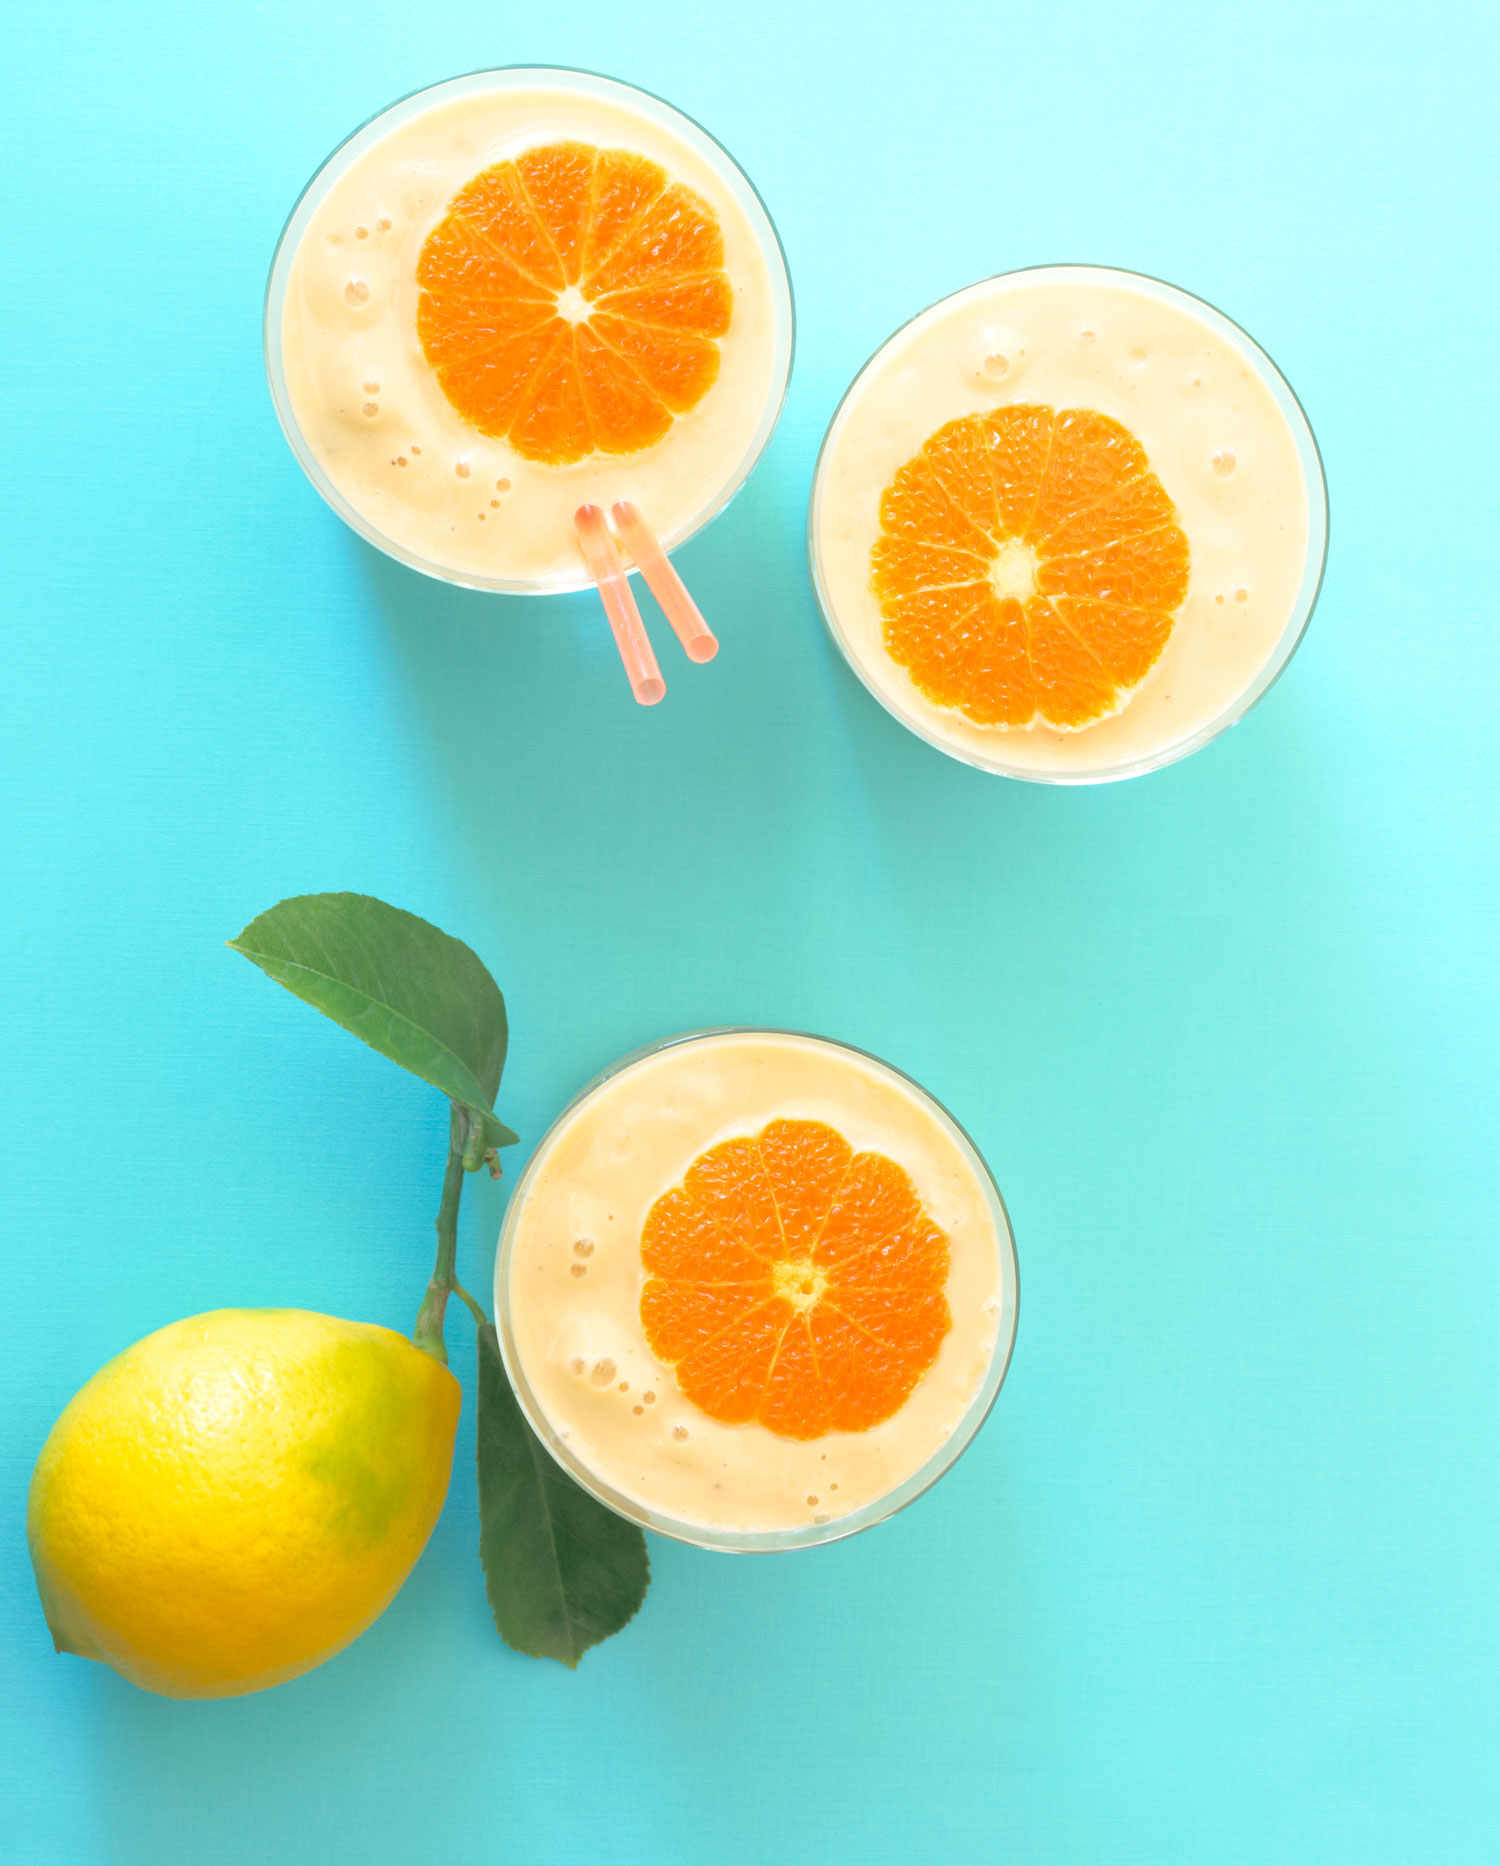 8 Smoothies Worth Waking Up For